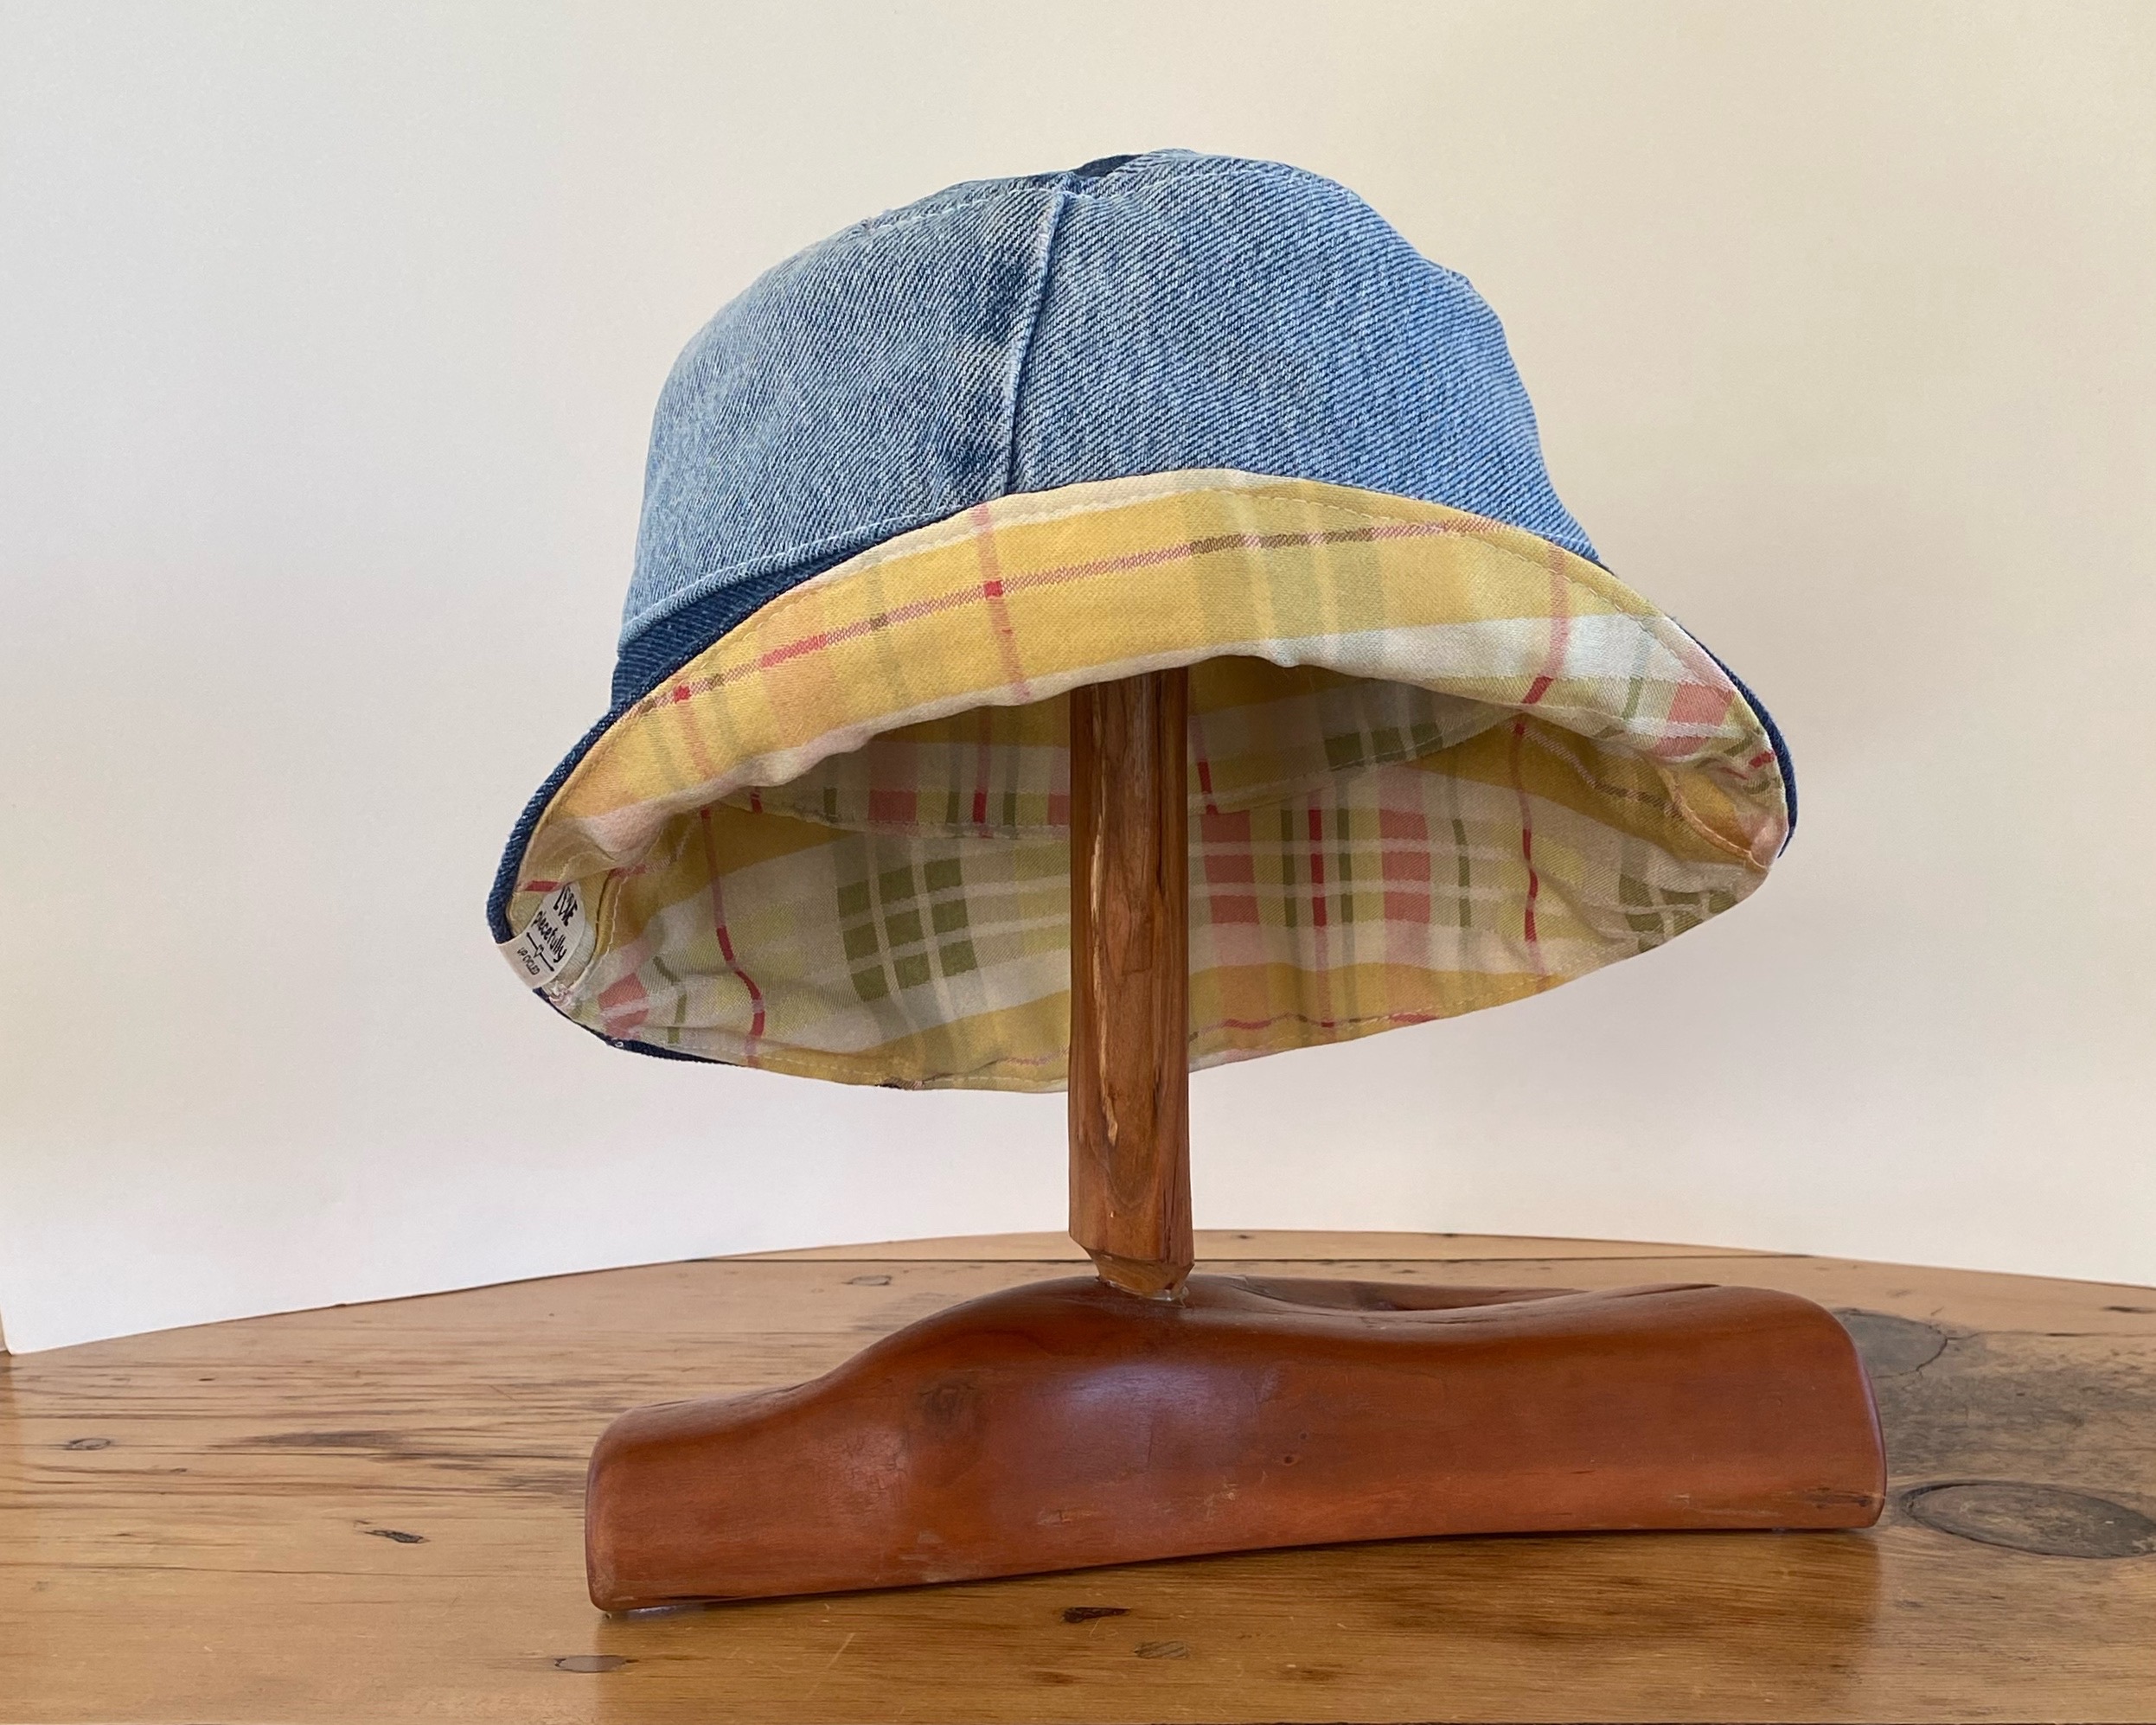 Handmade XL Bucket Hat in Patchworked Denim with Yellow Plaid Lining